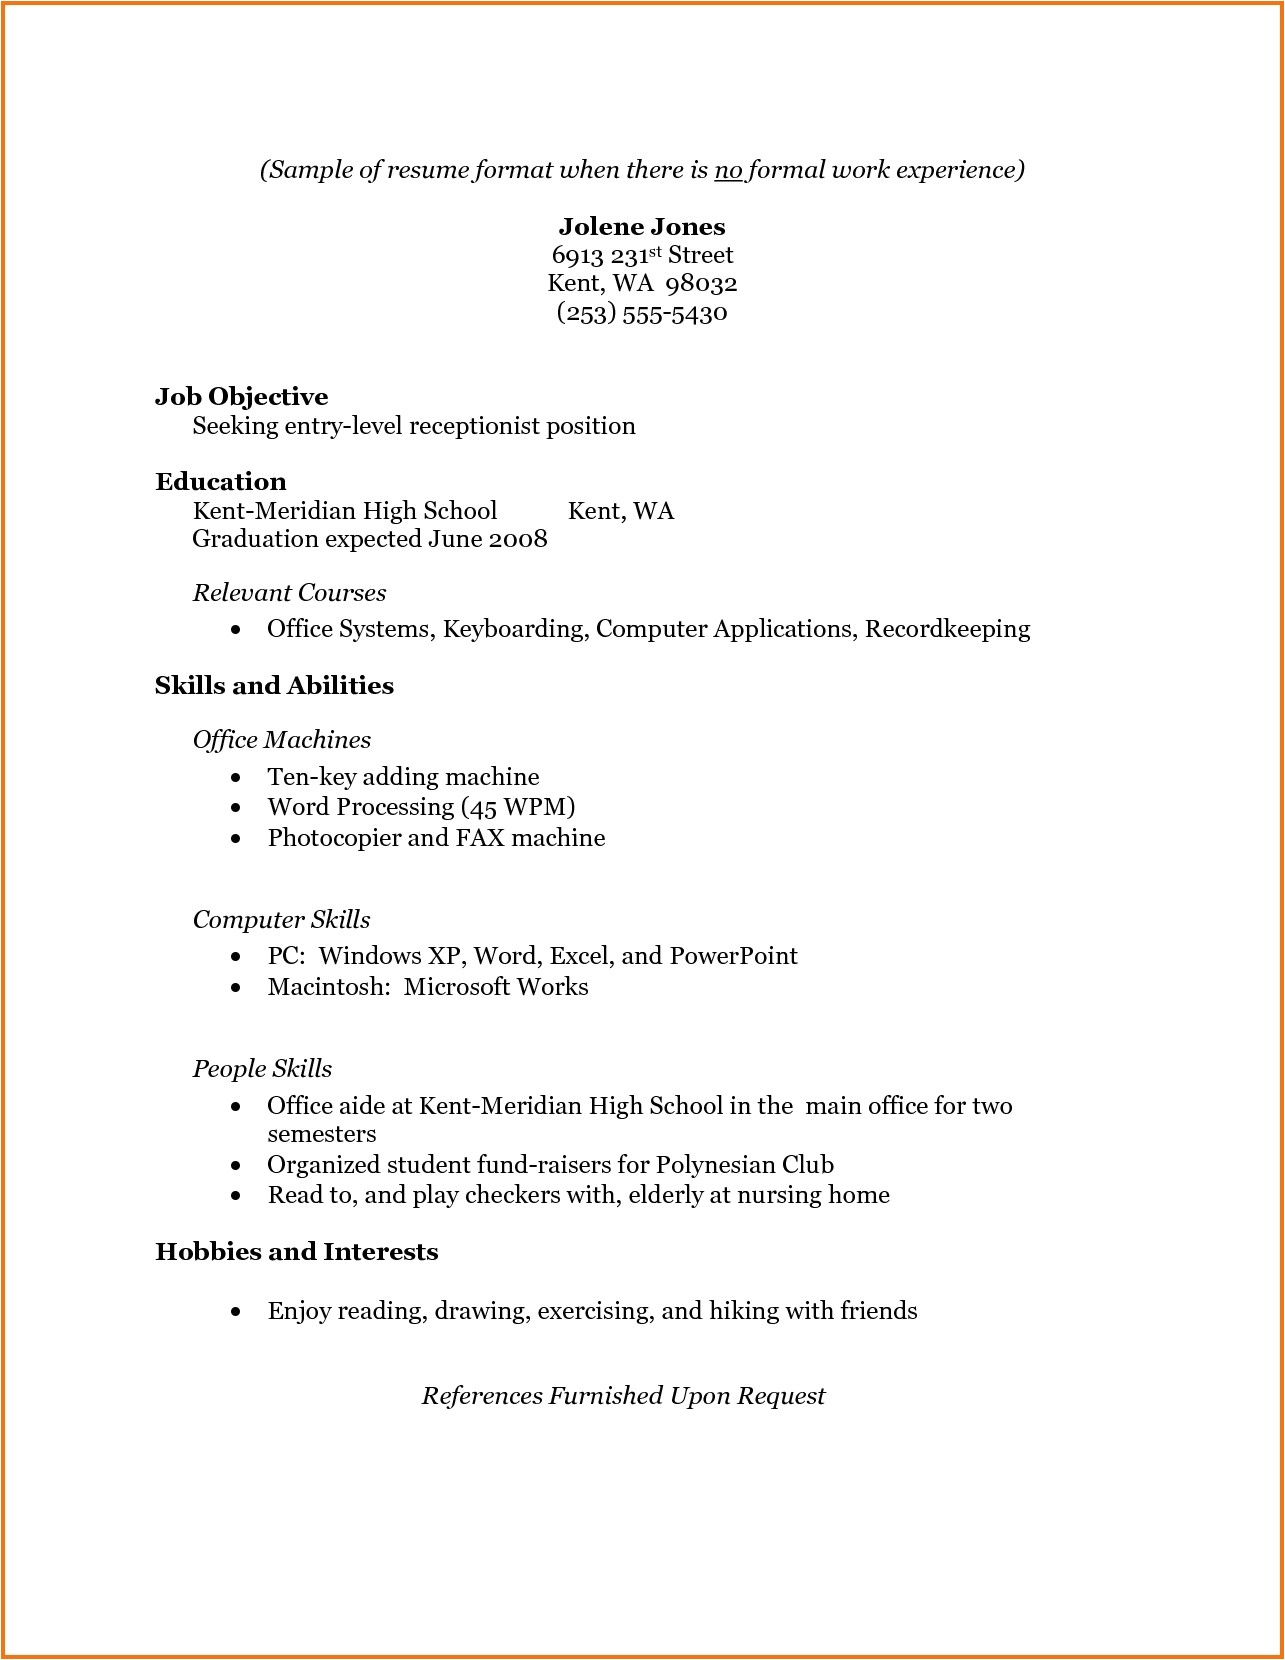 simple resume sample without experience